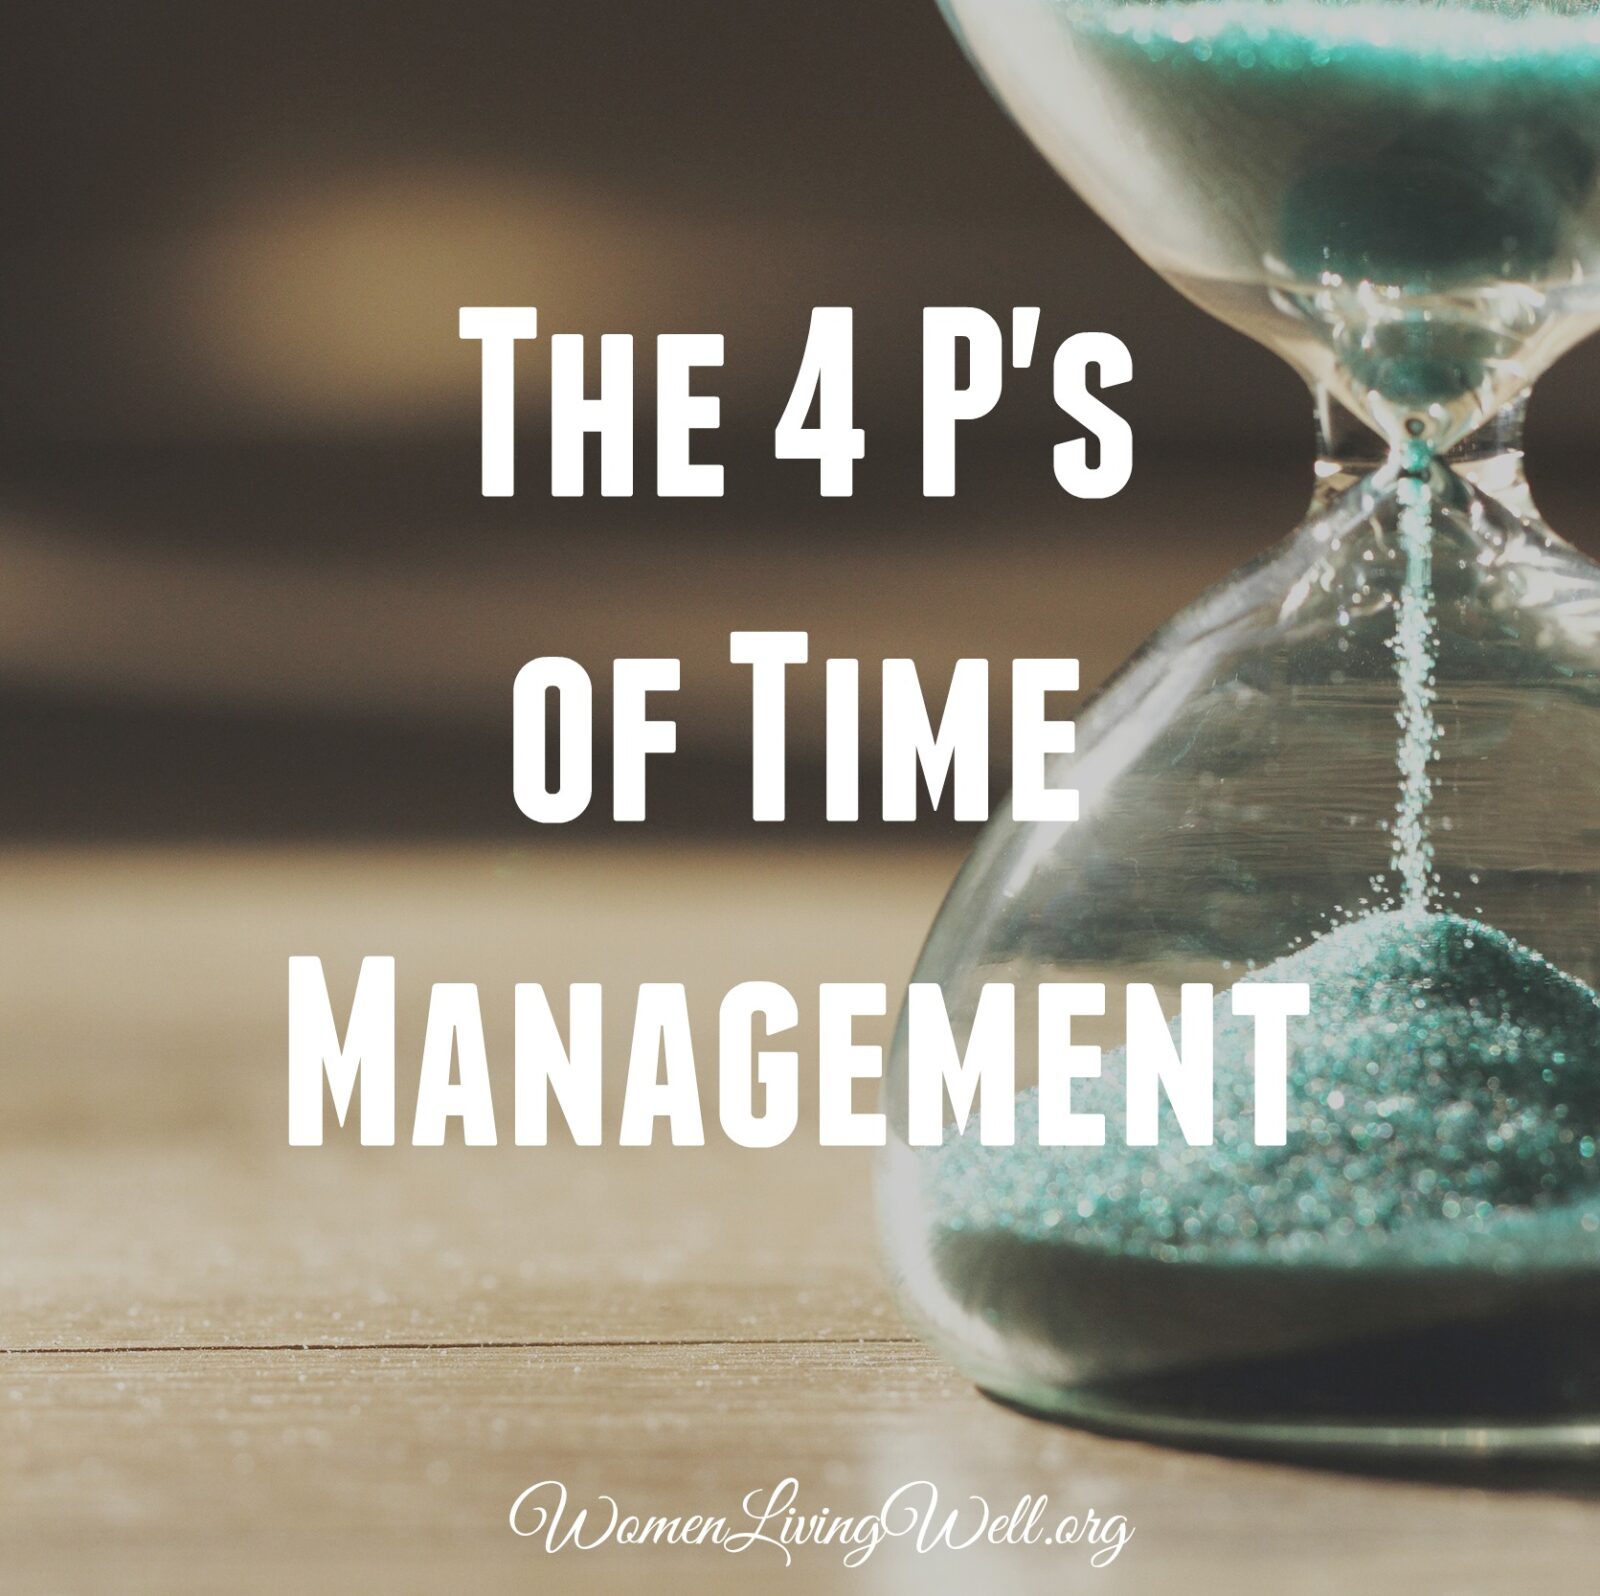 What Are the 4 P's of Time Management?